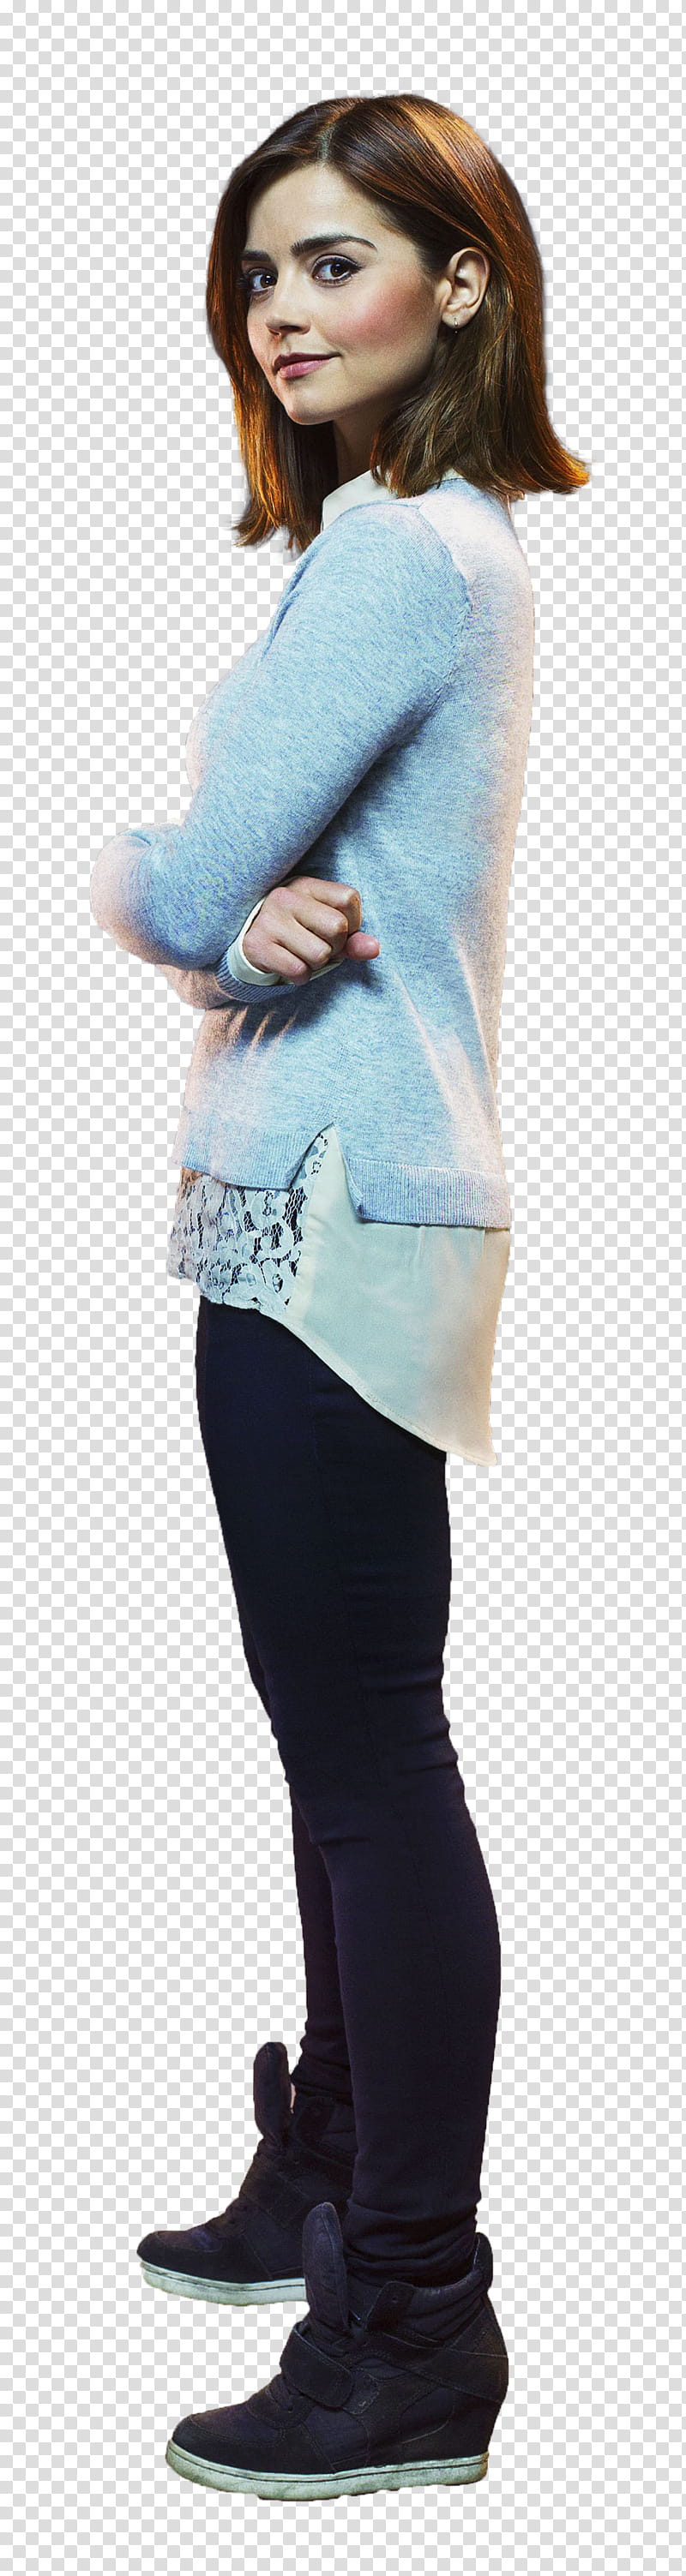 Doctor Who Season , woman in gray sweatshirt transparent background PNG clipart